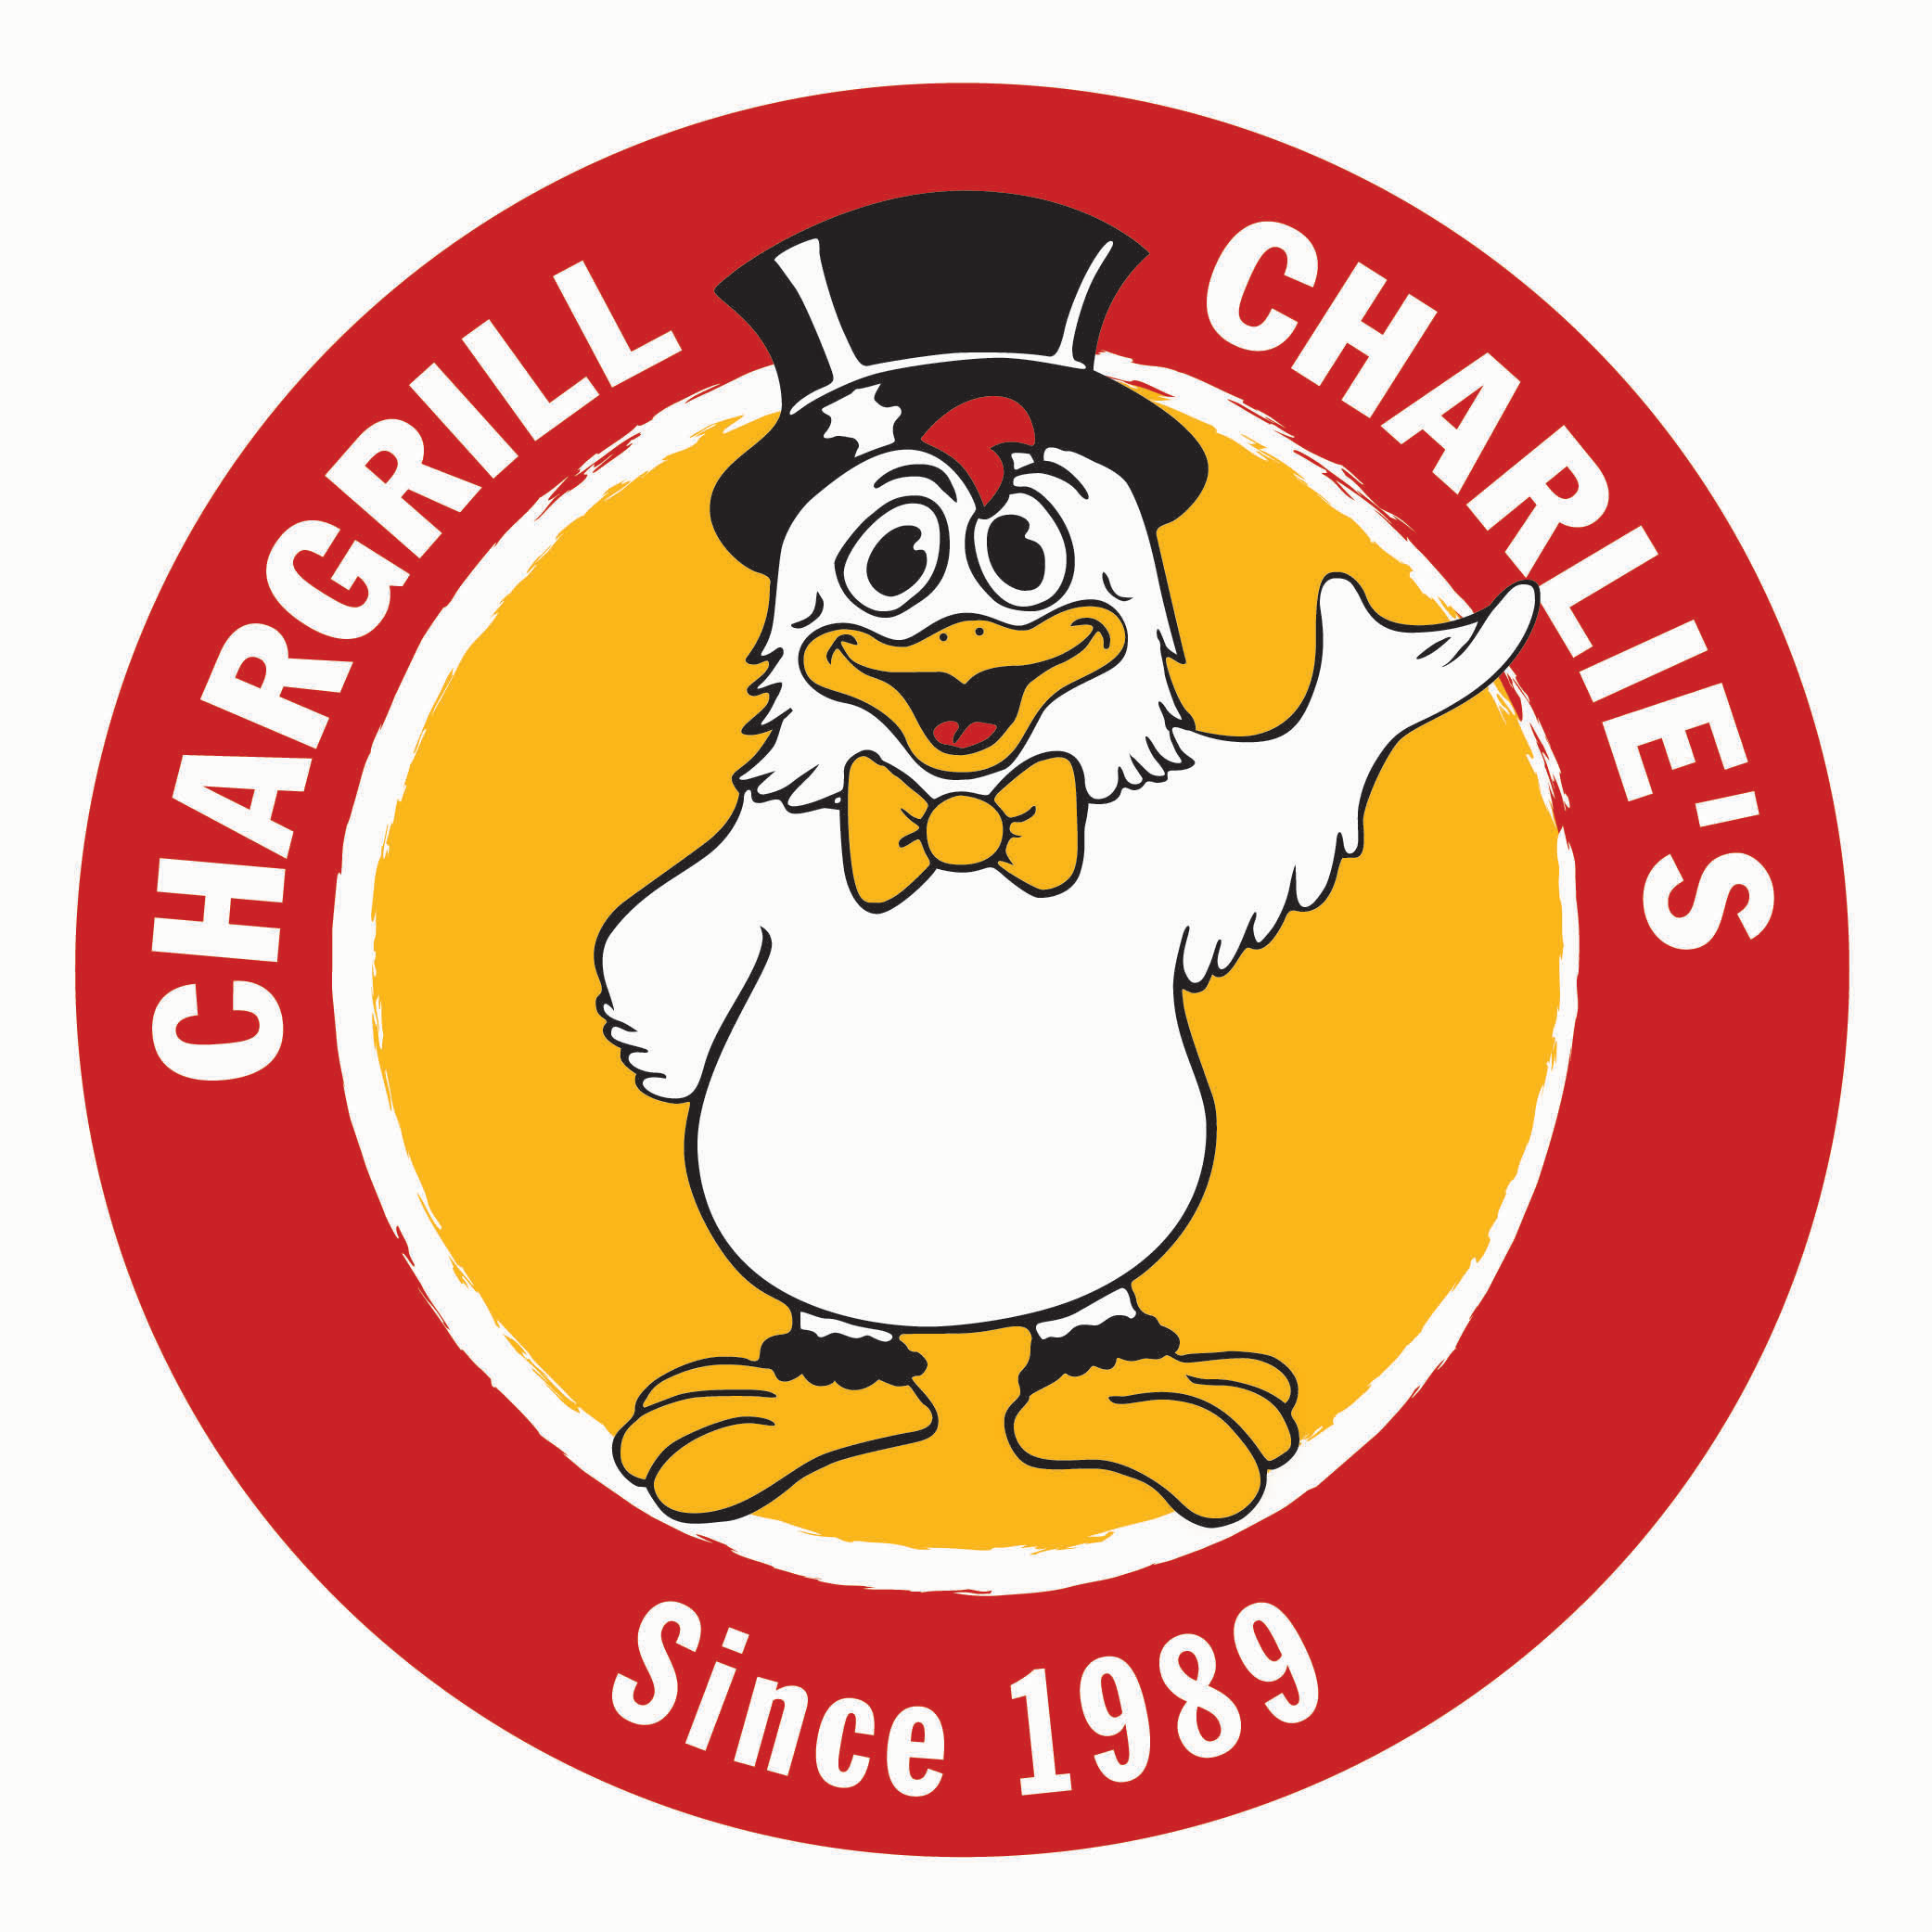 Chargrill Charlie's Logo